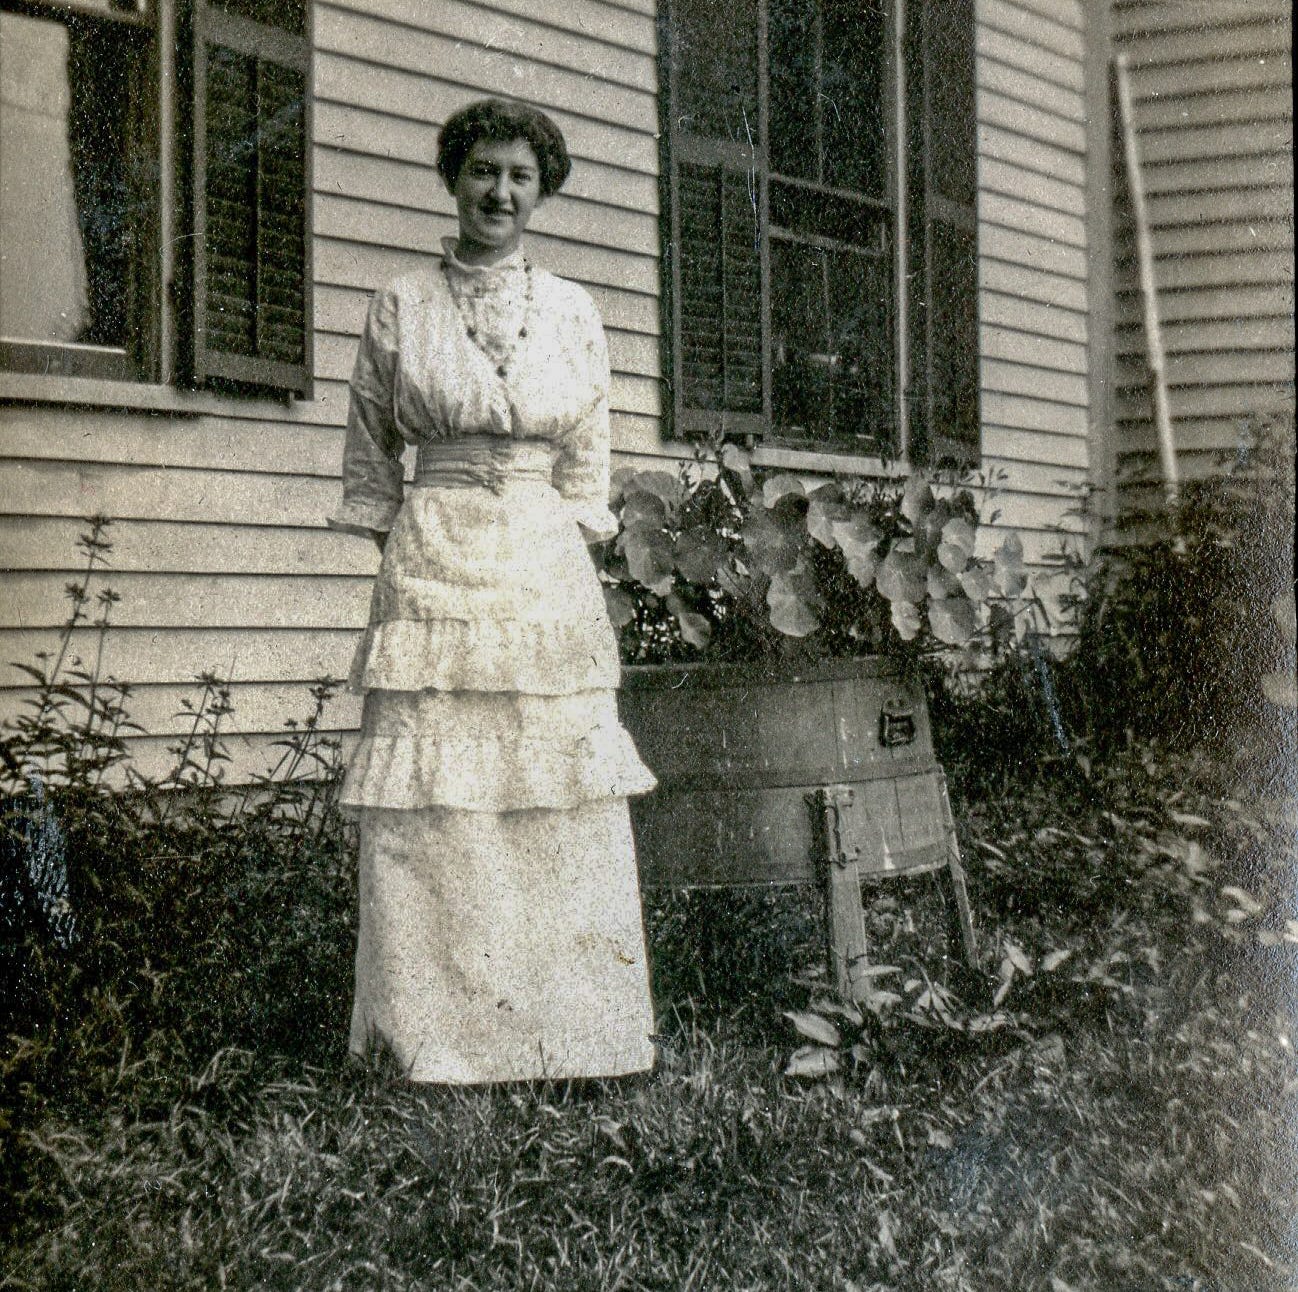 Woman standing outside next to planter with vine